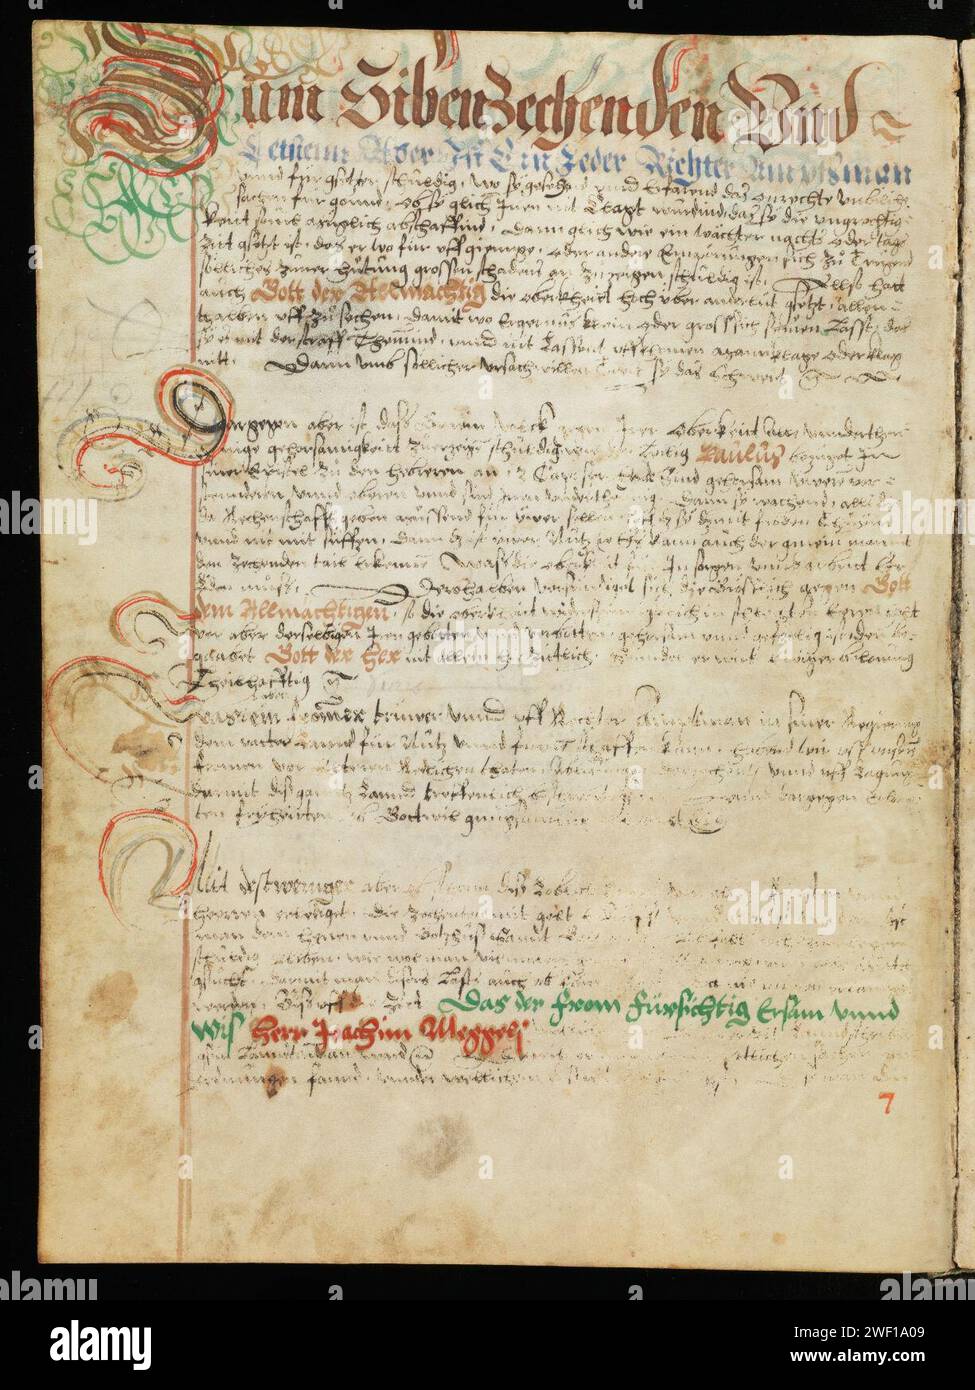 Appenzell, Landesarchiv Appenzell Innerrhoden, E.10.02.01.01, f. 5v – Silver Book of the Land. Stock Photo